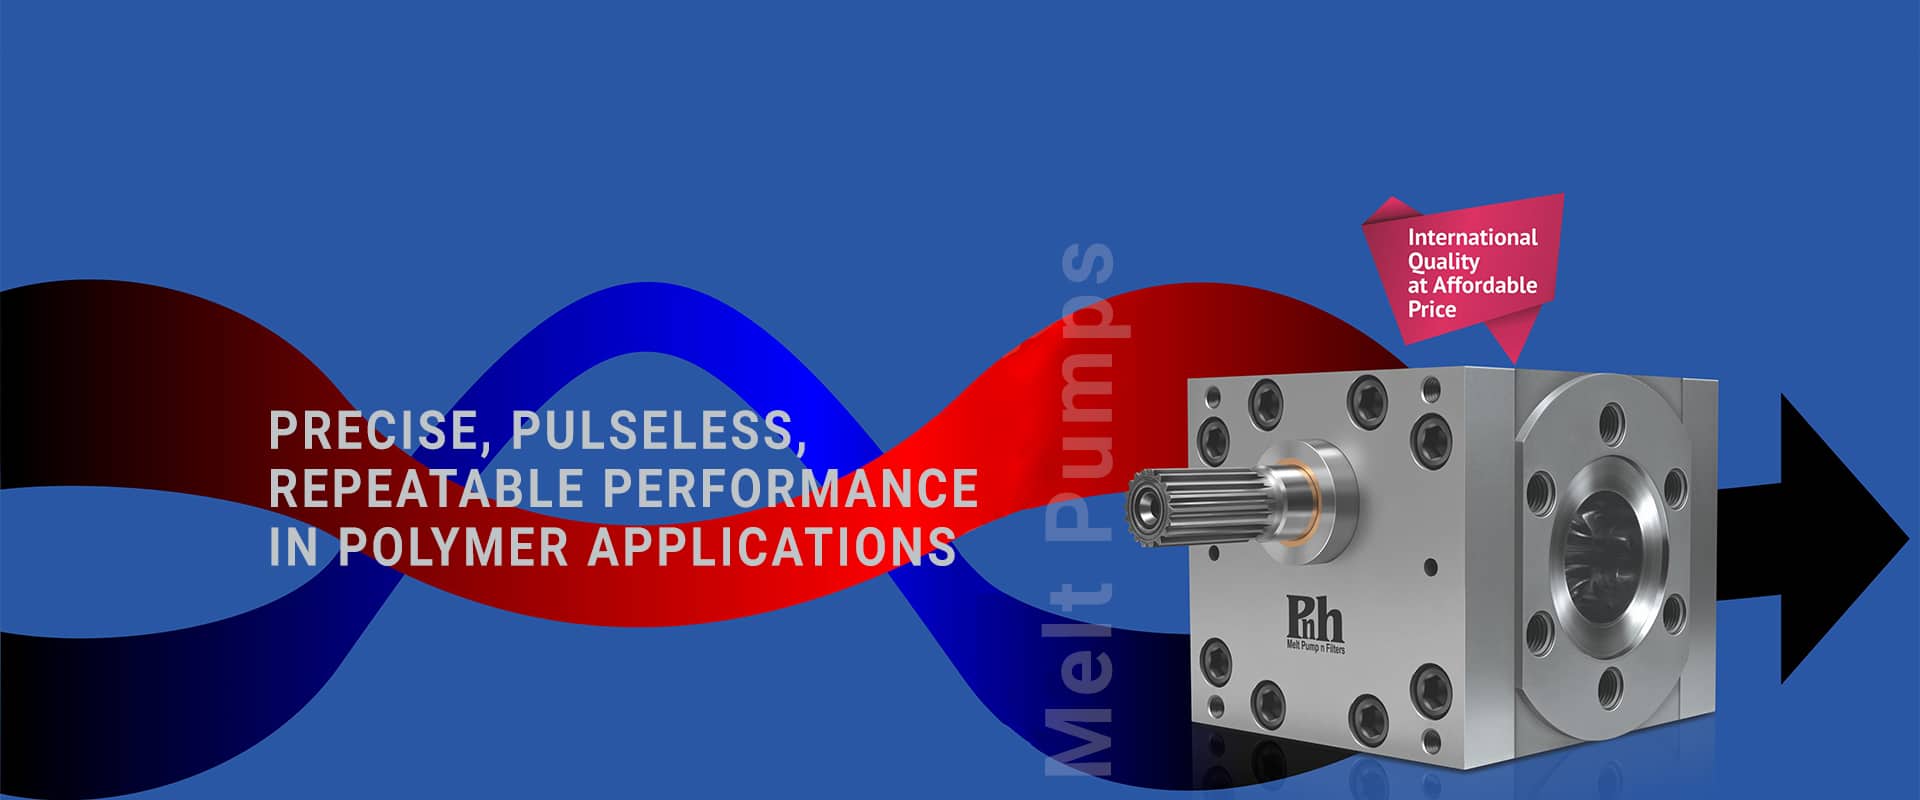 Precise, Pulseless in Polymer Application